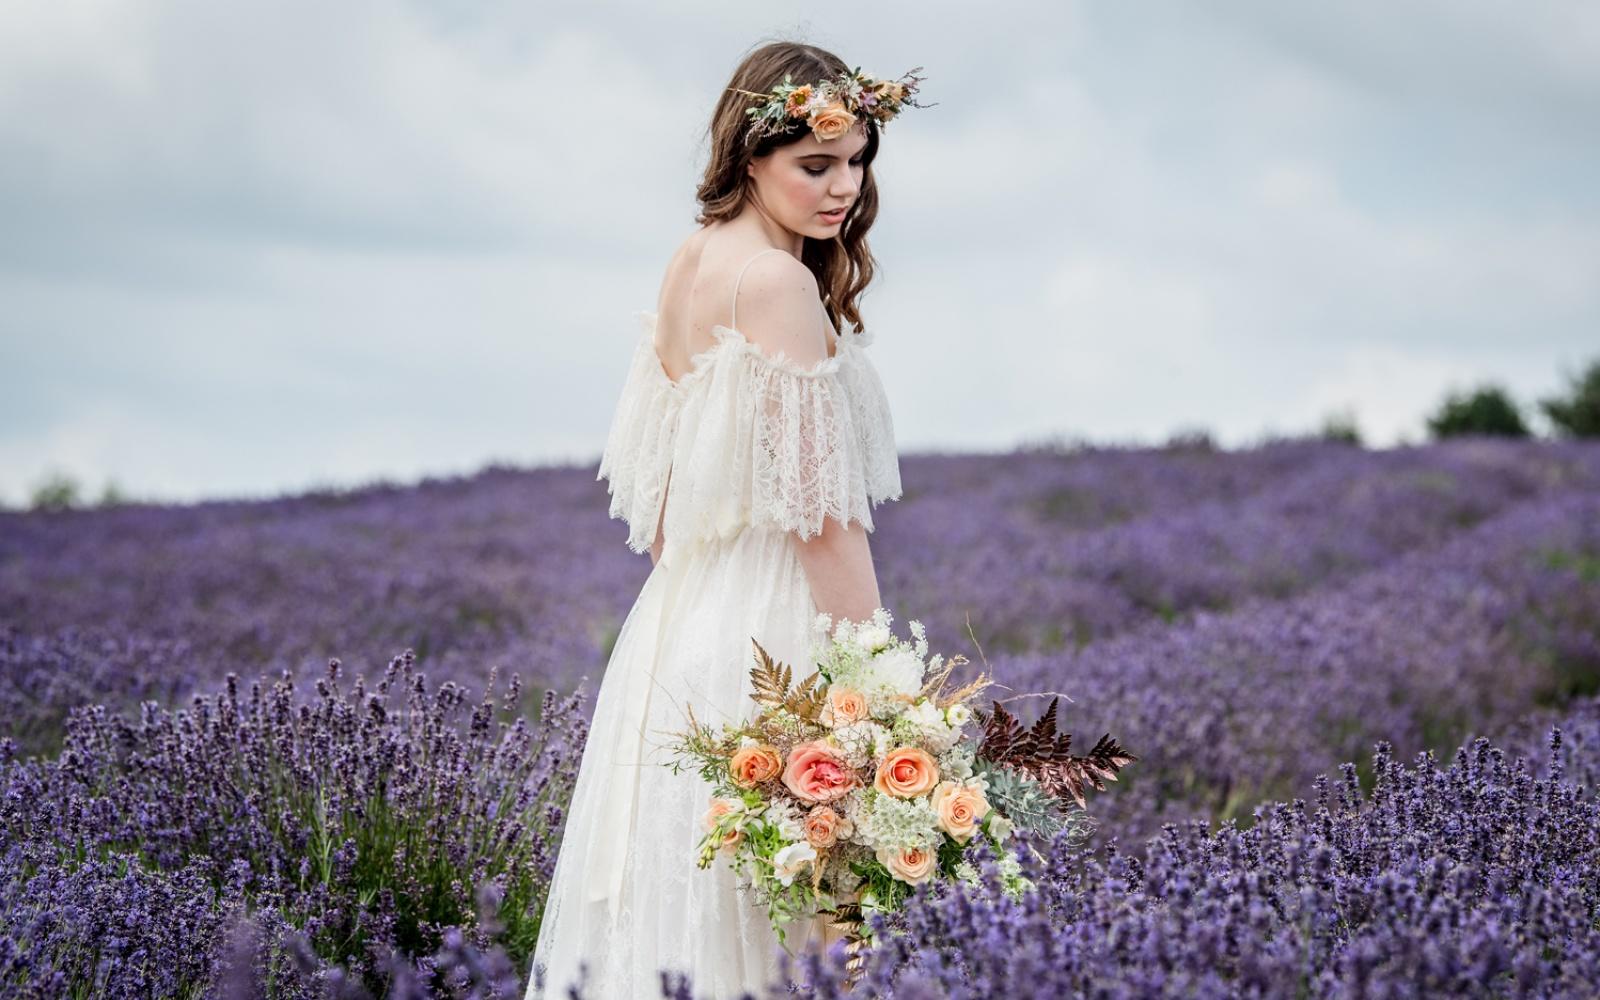 Styled Shoot ideas inspiration Capture Every Moment Make Up by Carissa Wendy House Flowers Willoughby Wolf lavender fields Snowshill flower crown bouquet peach boho style